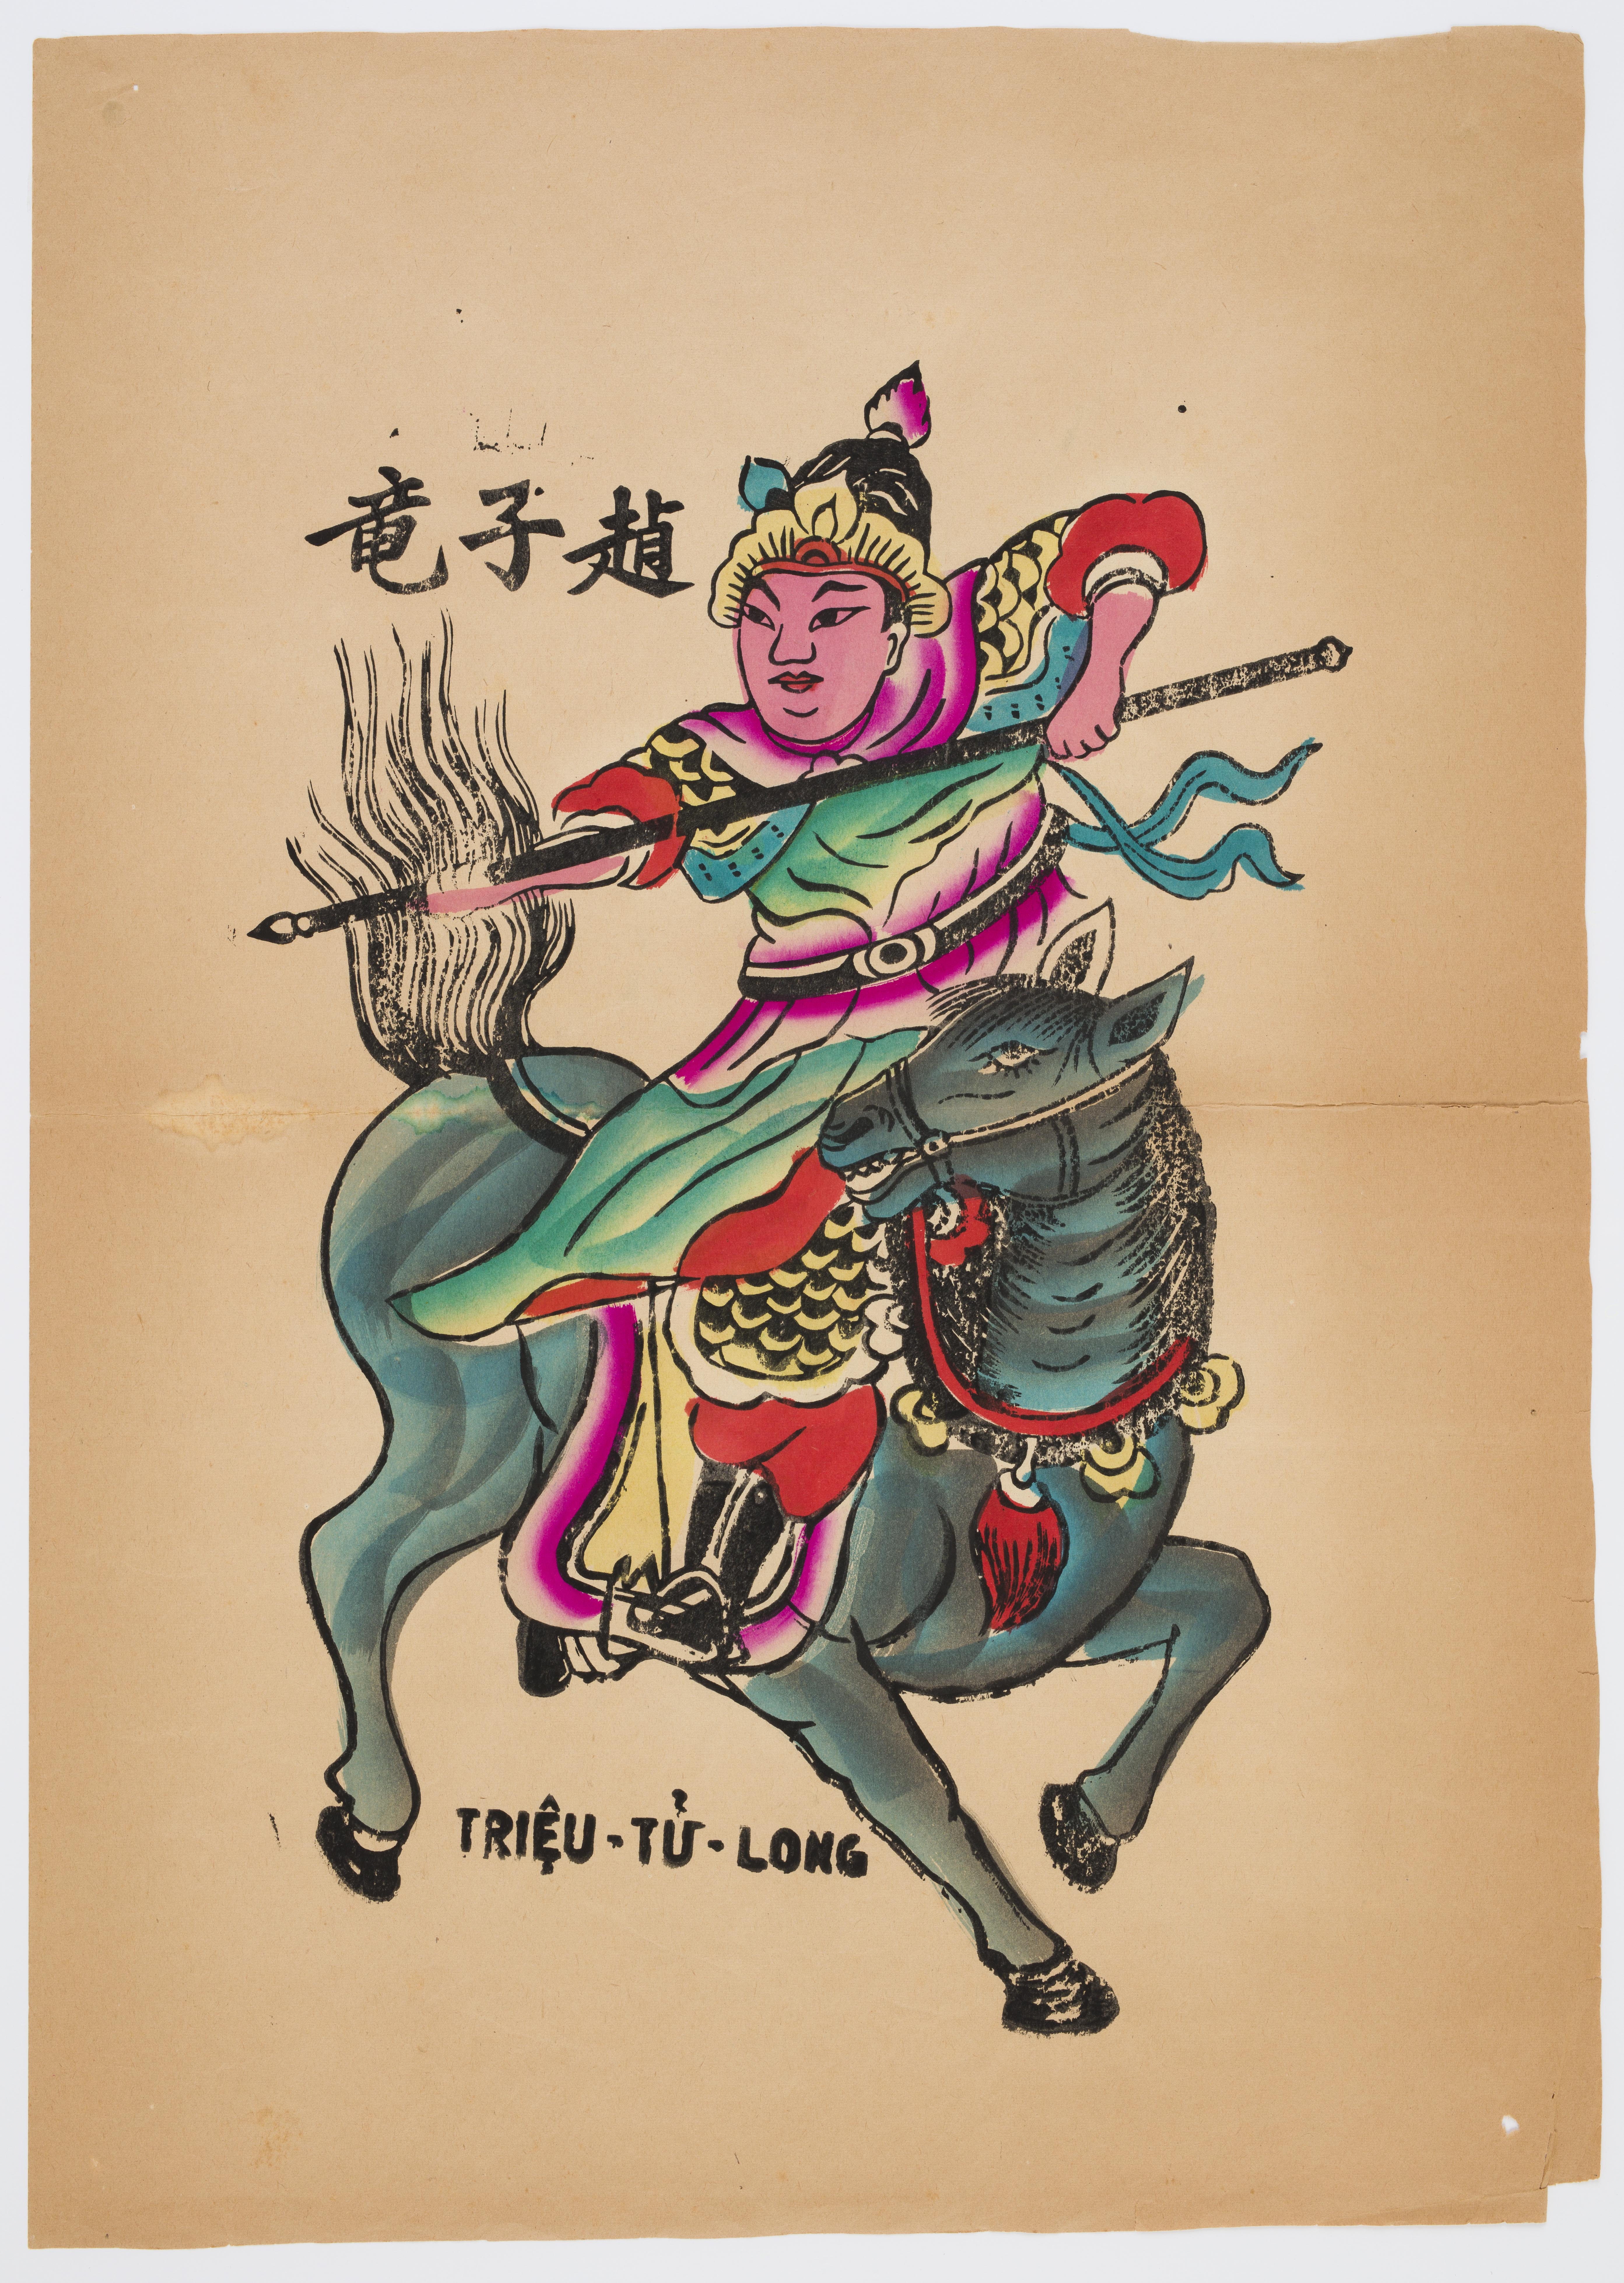 A colourful print poster depicting a general wielding a spear atop a horse